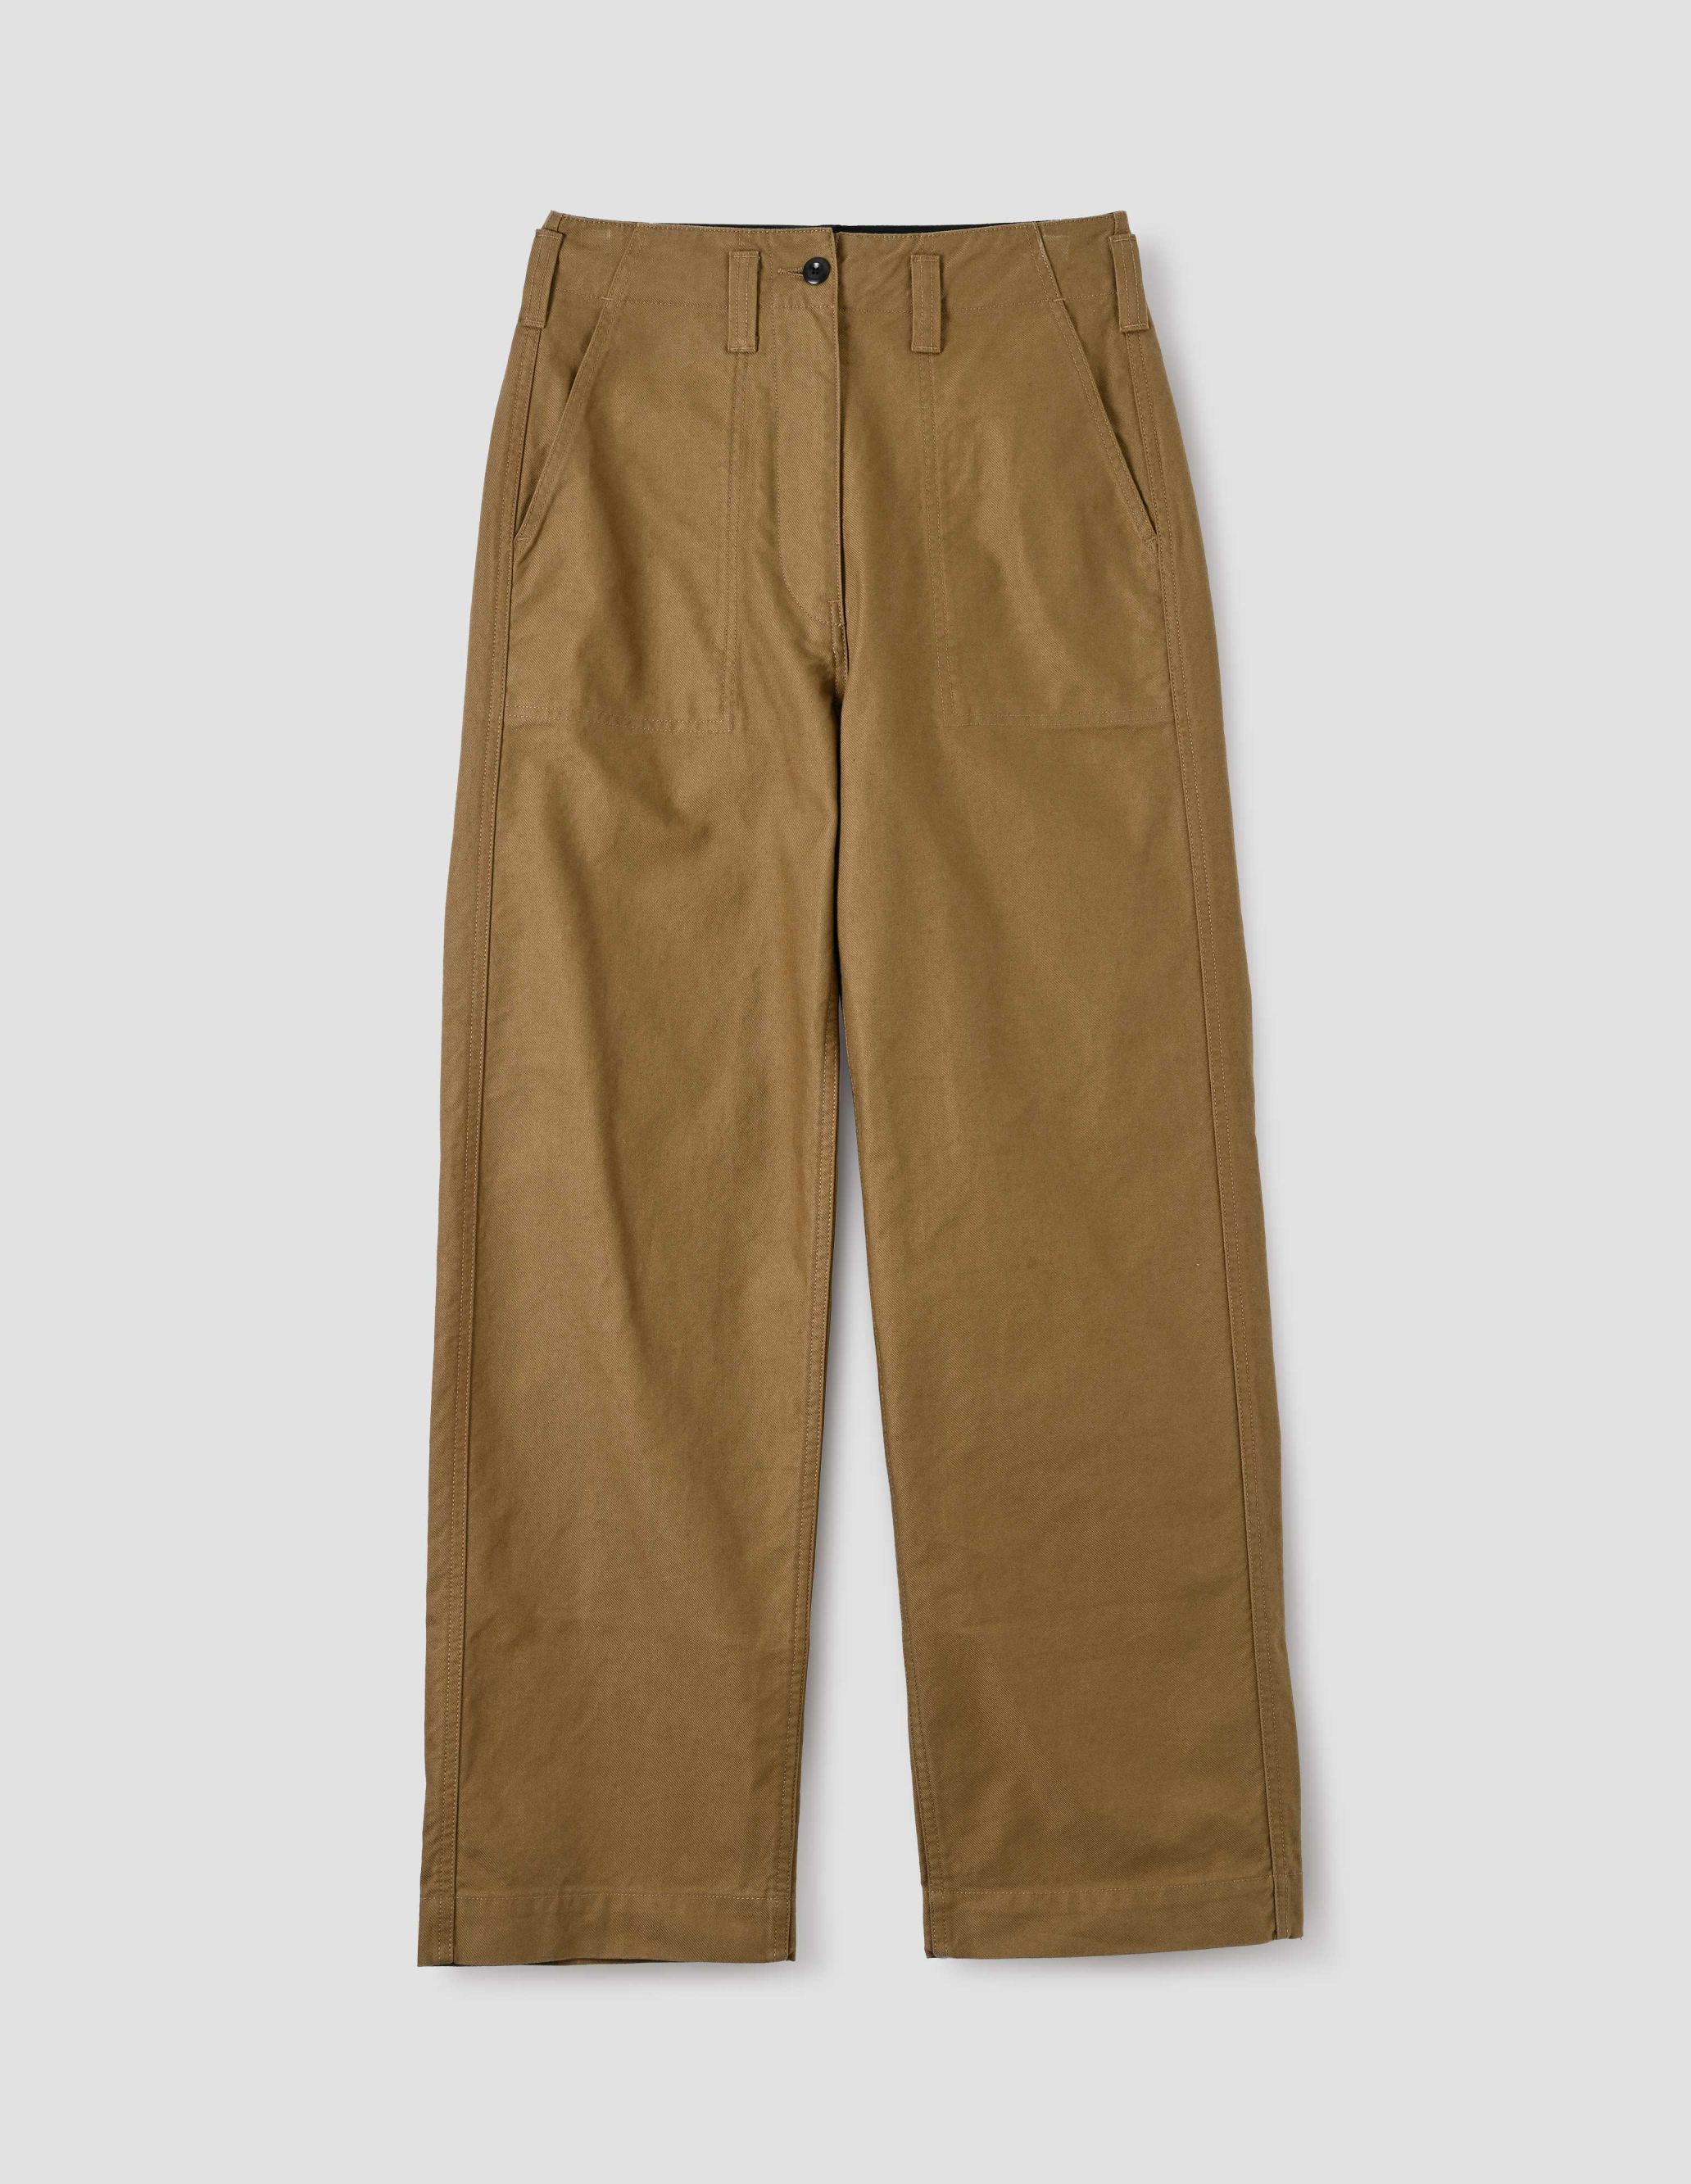 Made to Order  WBill cotton drill Trousers  WBB Tailor